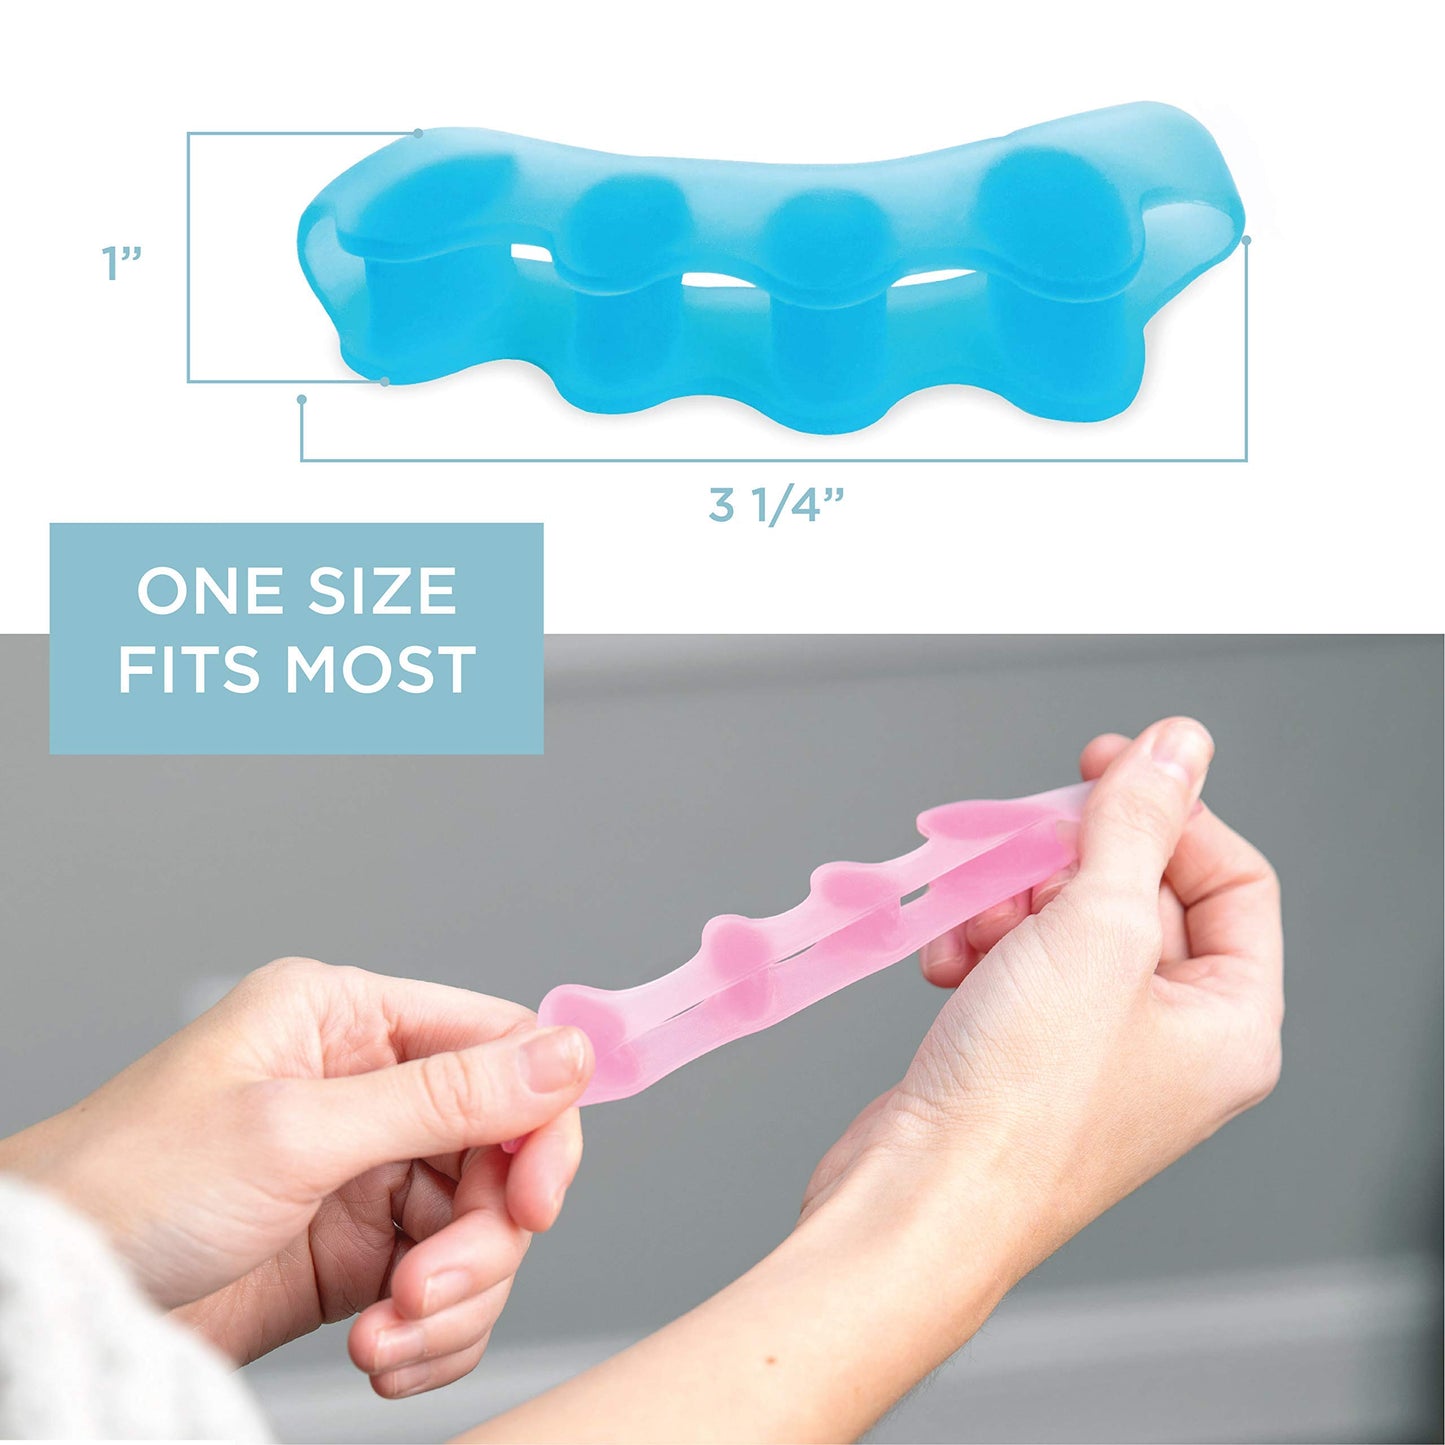 KASTWAVE Toe Separators for Overlapping Toes and Restore Crooked Toes to Their Original Shape, Correct Bunions, Toe Spacers Toe Straightener Toe Stretcher Hammer Toes - Universal Size, 4 Pair